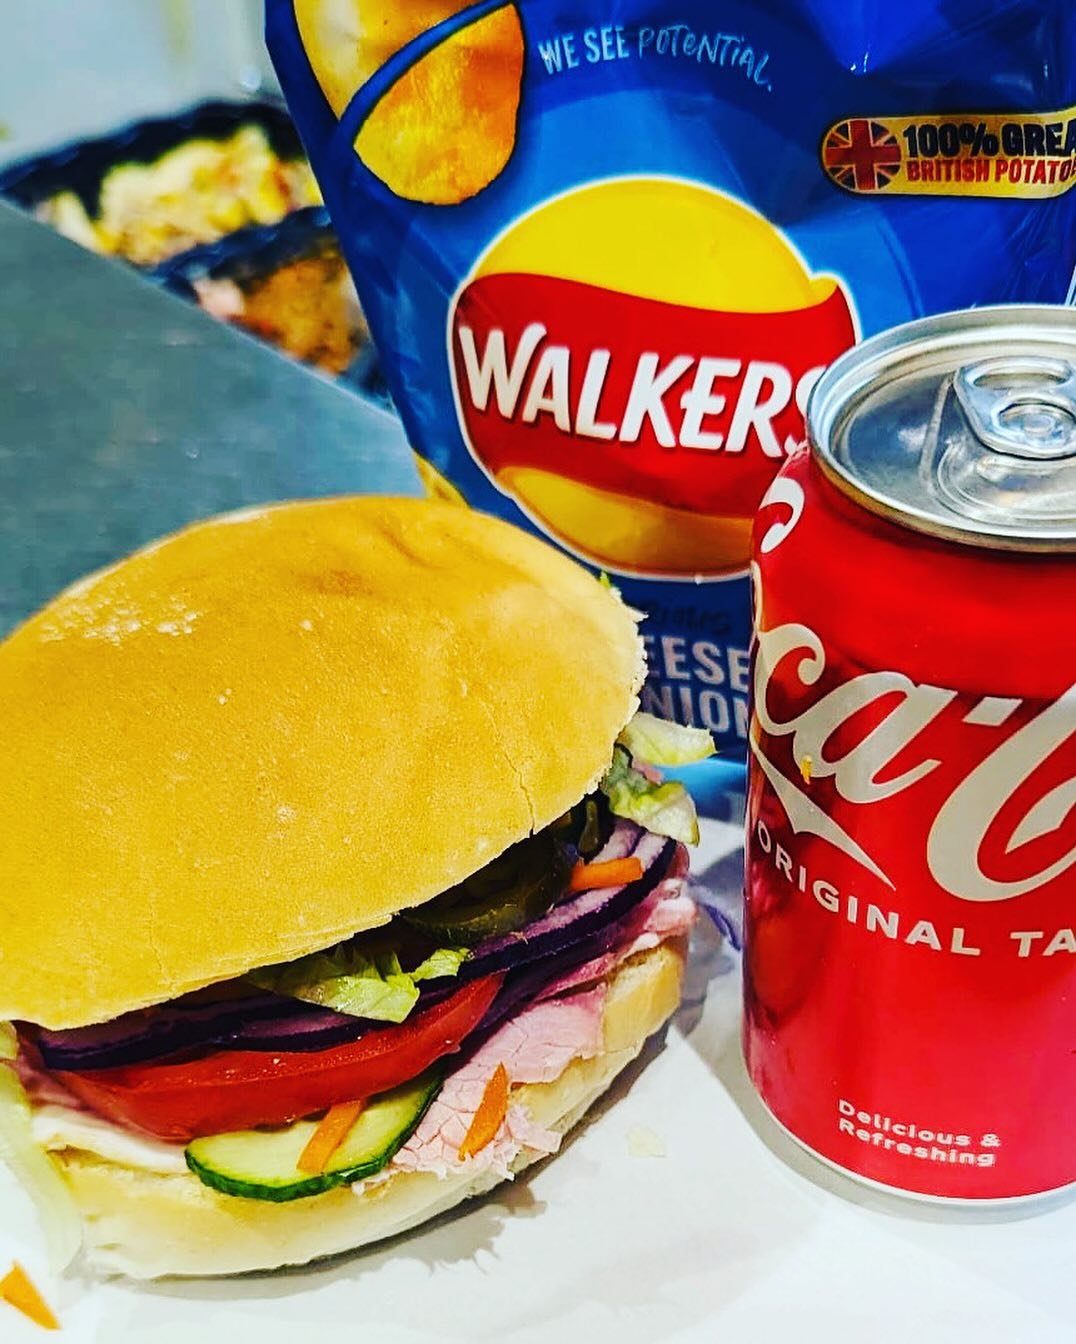 Meal deal !! We are now doing a meal deal available from our sandwich bar &hellip; a  small sandwich, a packet of walkers crips and a can of pop&hellip; only &pound;4.75p !!